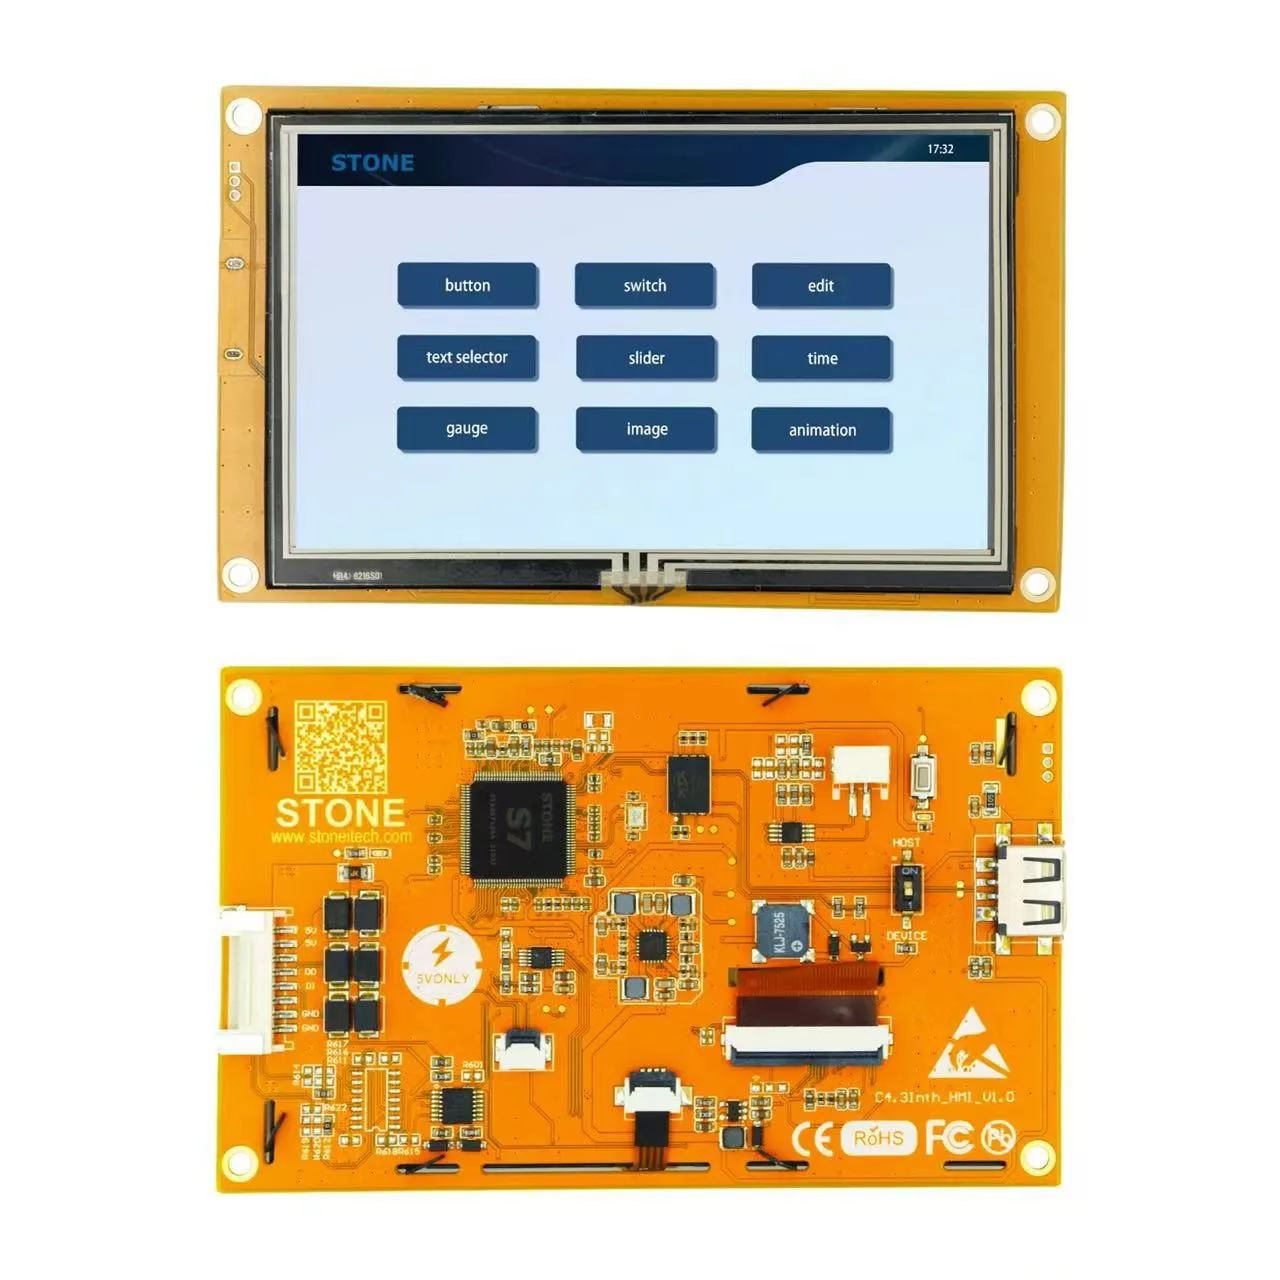 4.3 Inch LCD Screen Module TFT Driver,Flash Memory,UART port,power supply and so on,the important is that it has the ready-made